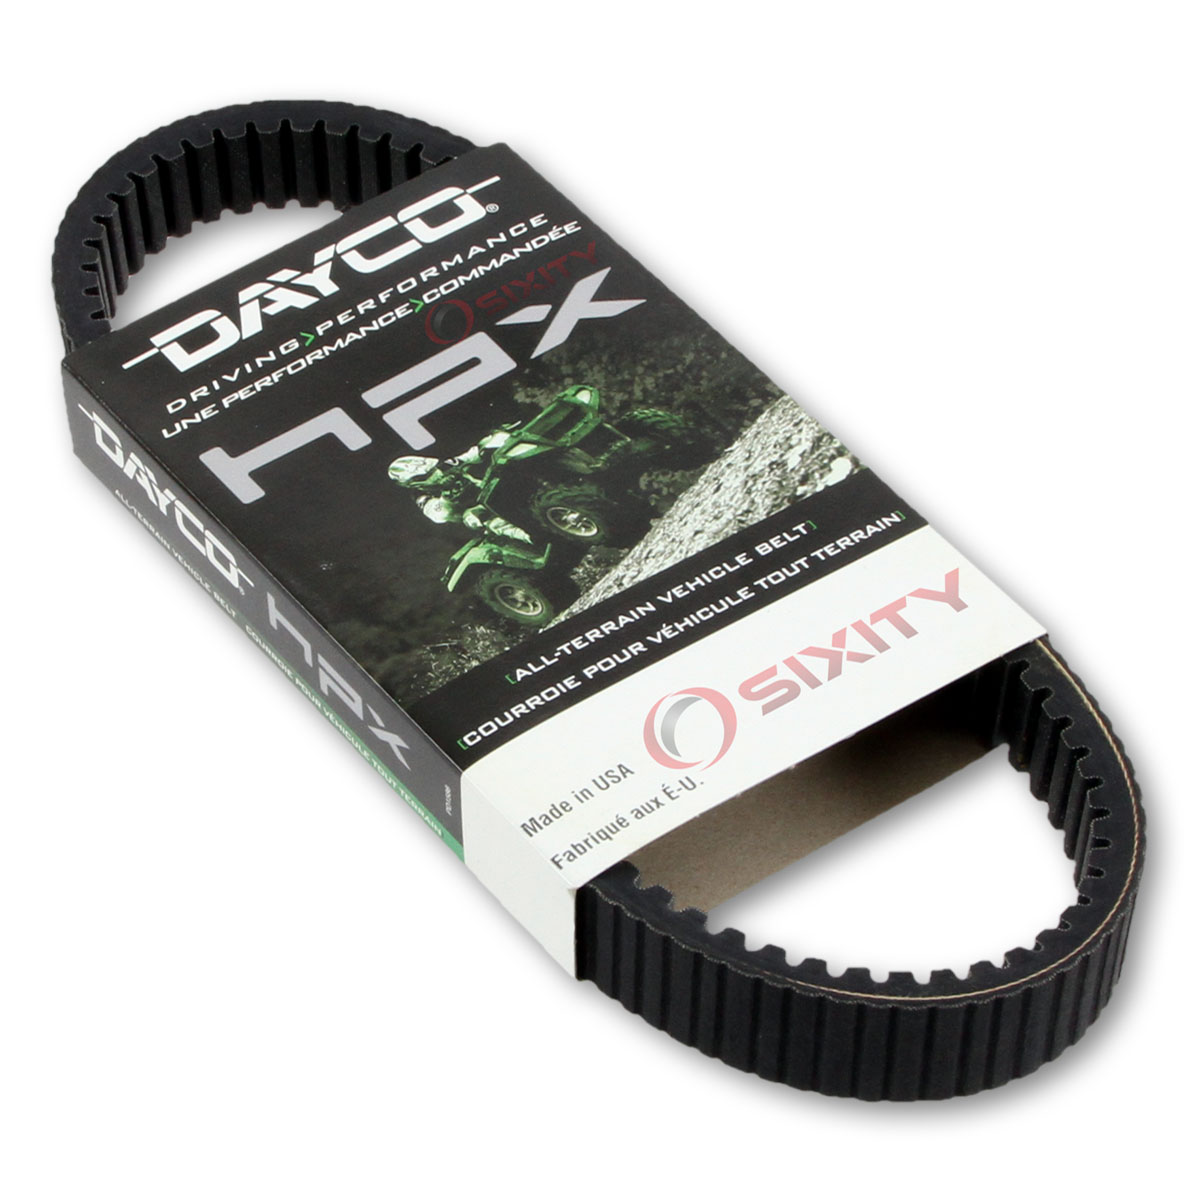 Dayco HPX Drive Belt for 2011 Arctic Cat 550 S - High Performance Extreme